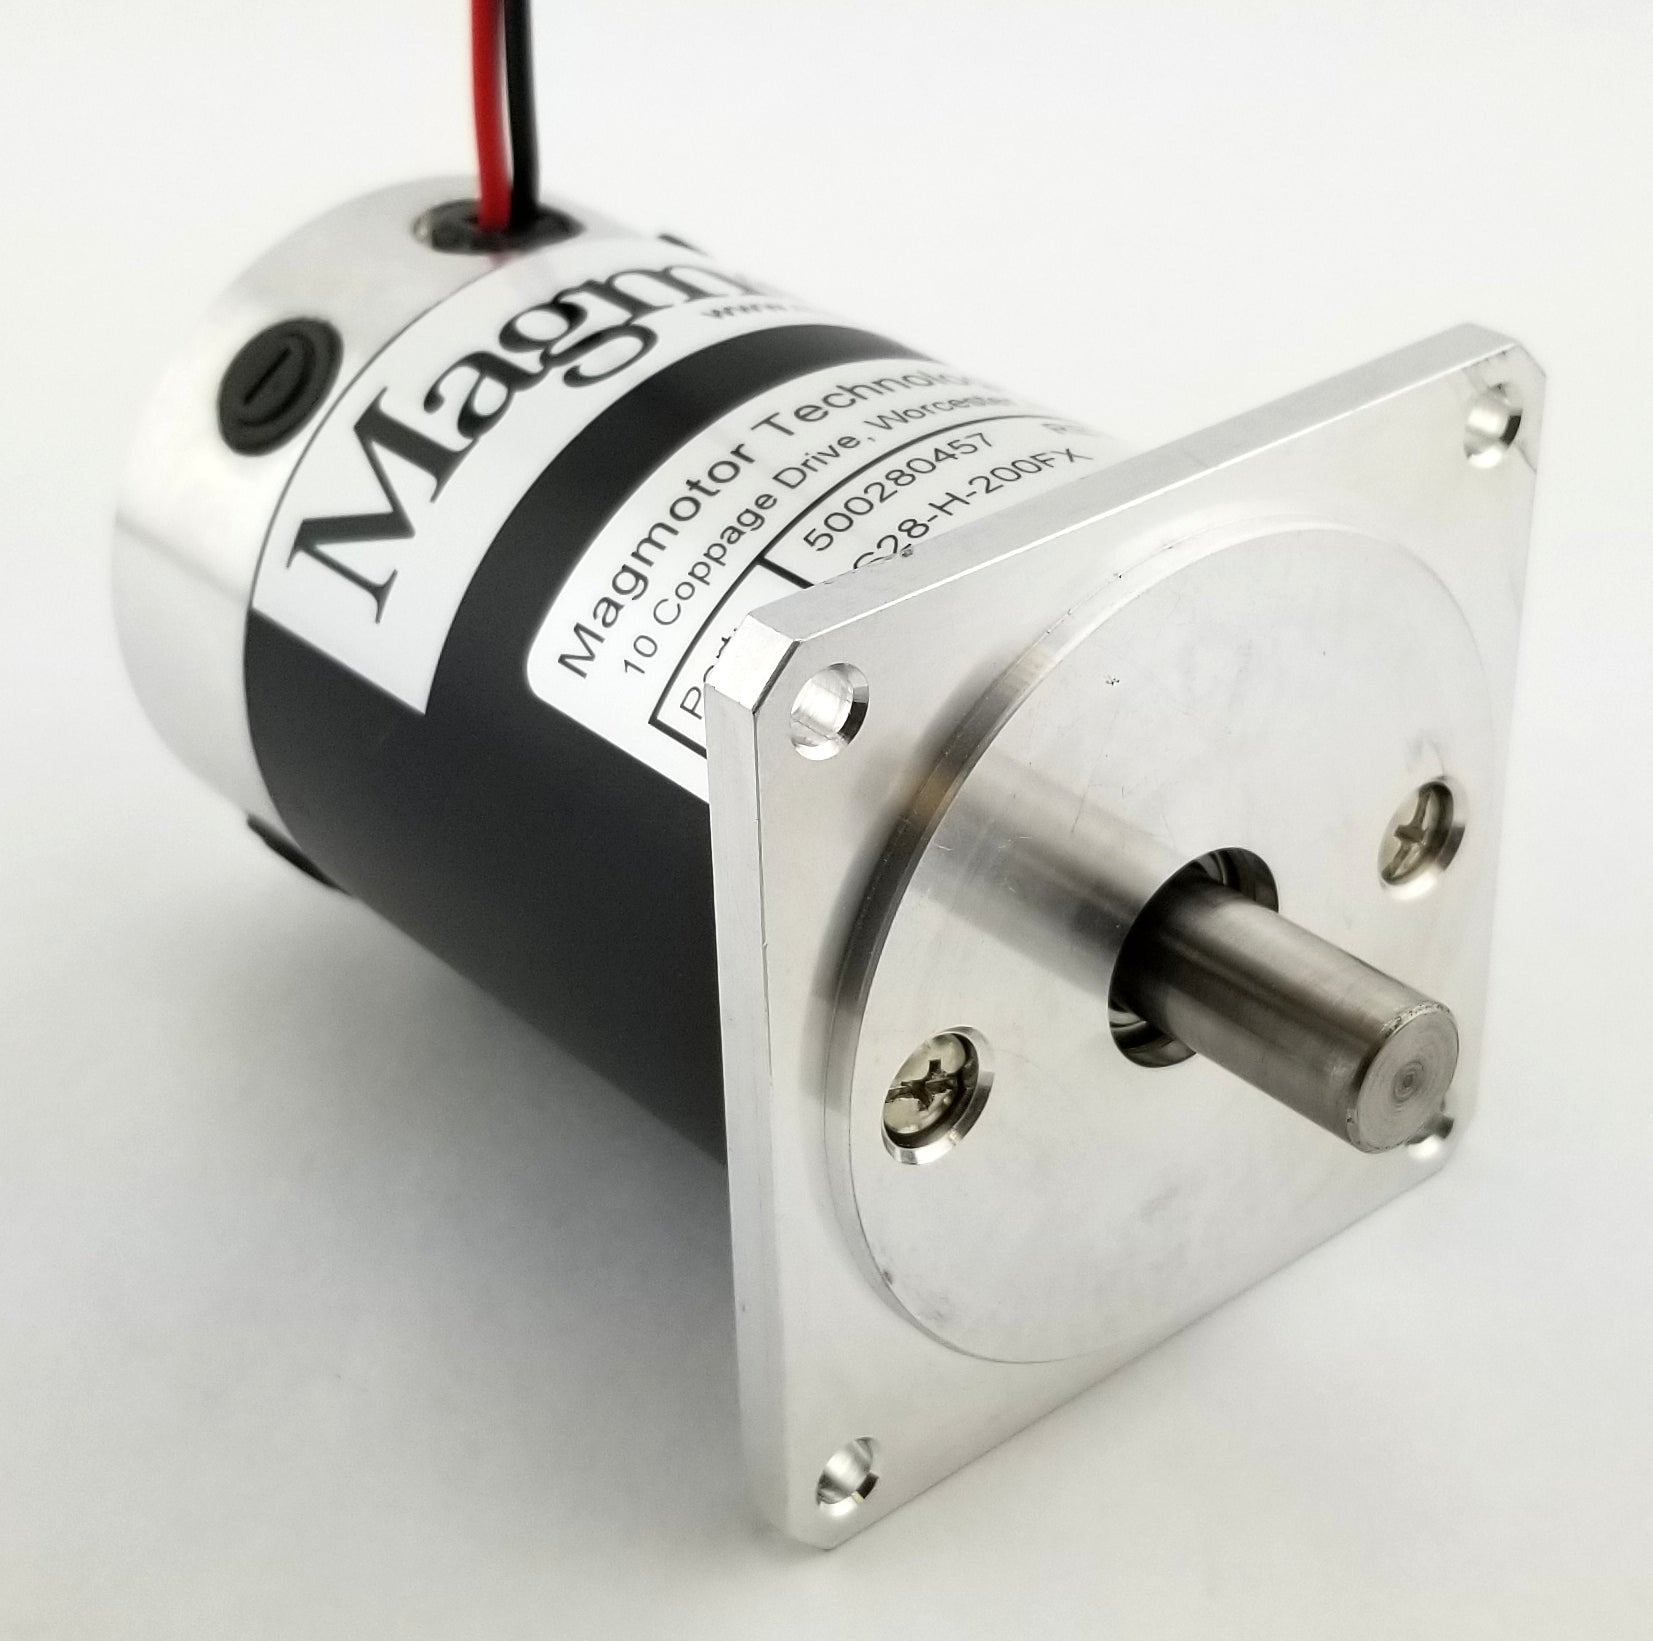 Magmotor S28-H-200FX 36 to 72 Volt 4 Pole Brushed Motor 500280457 Front View